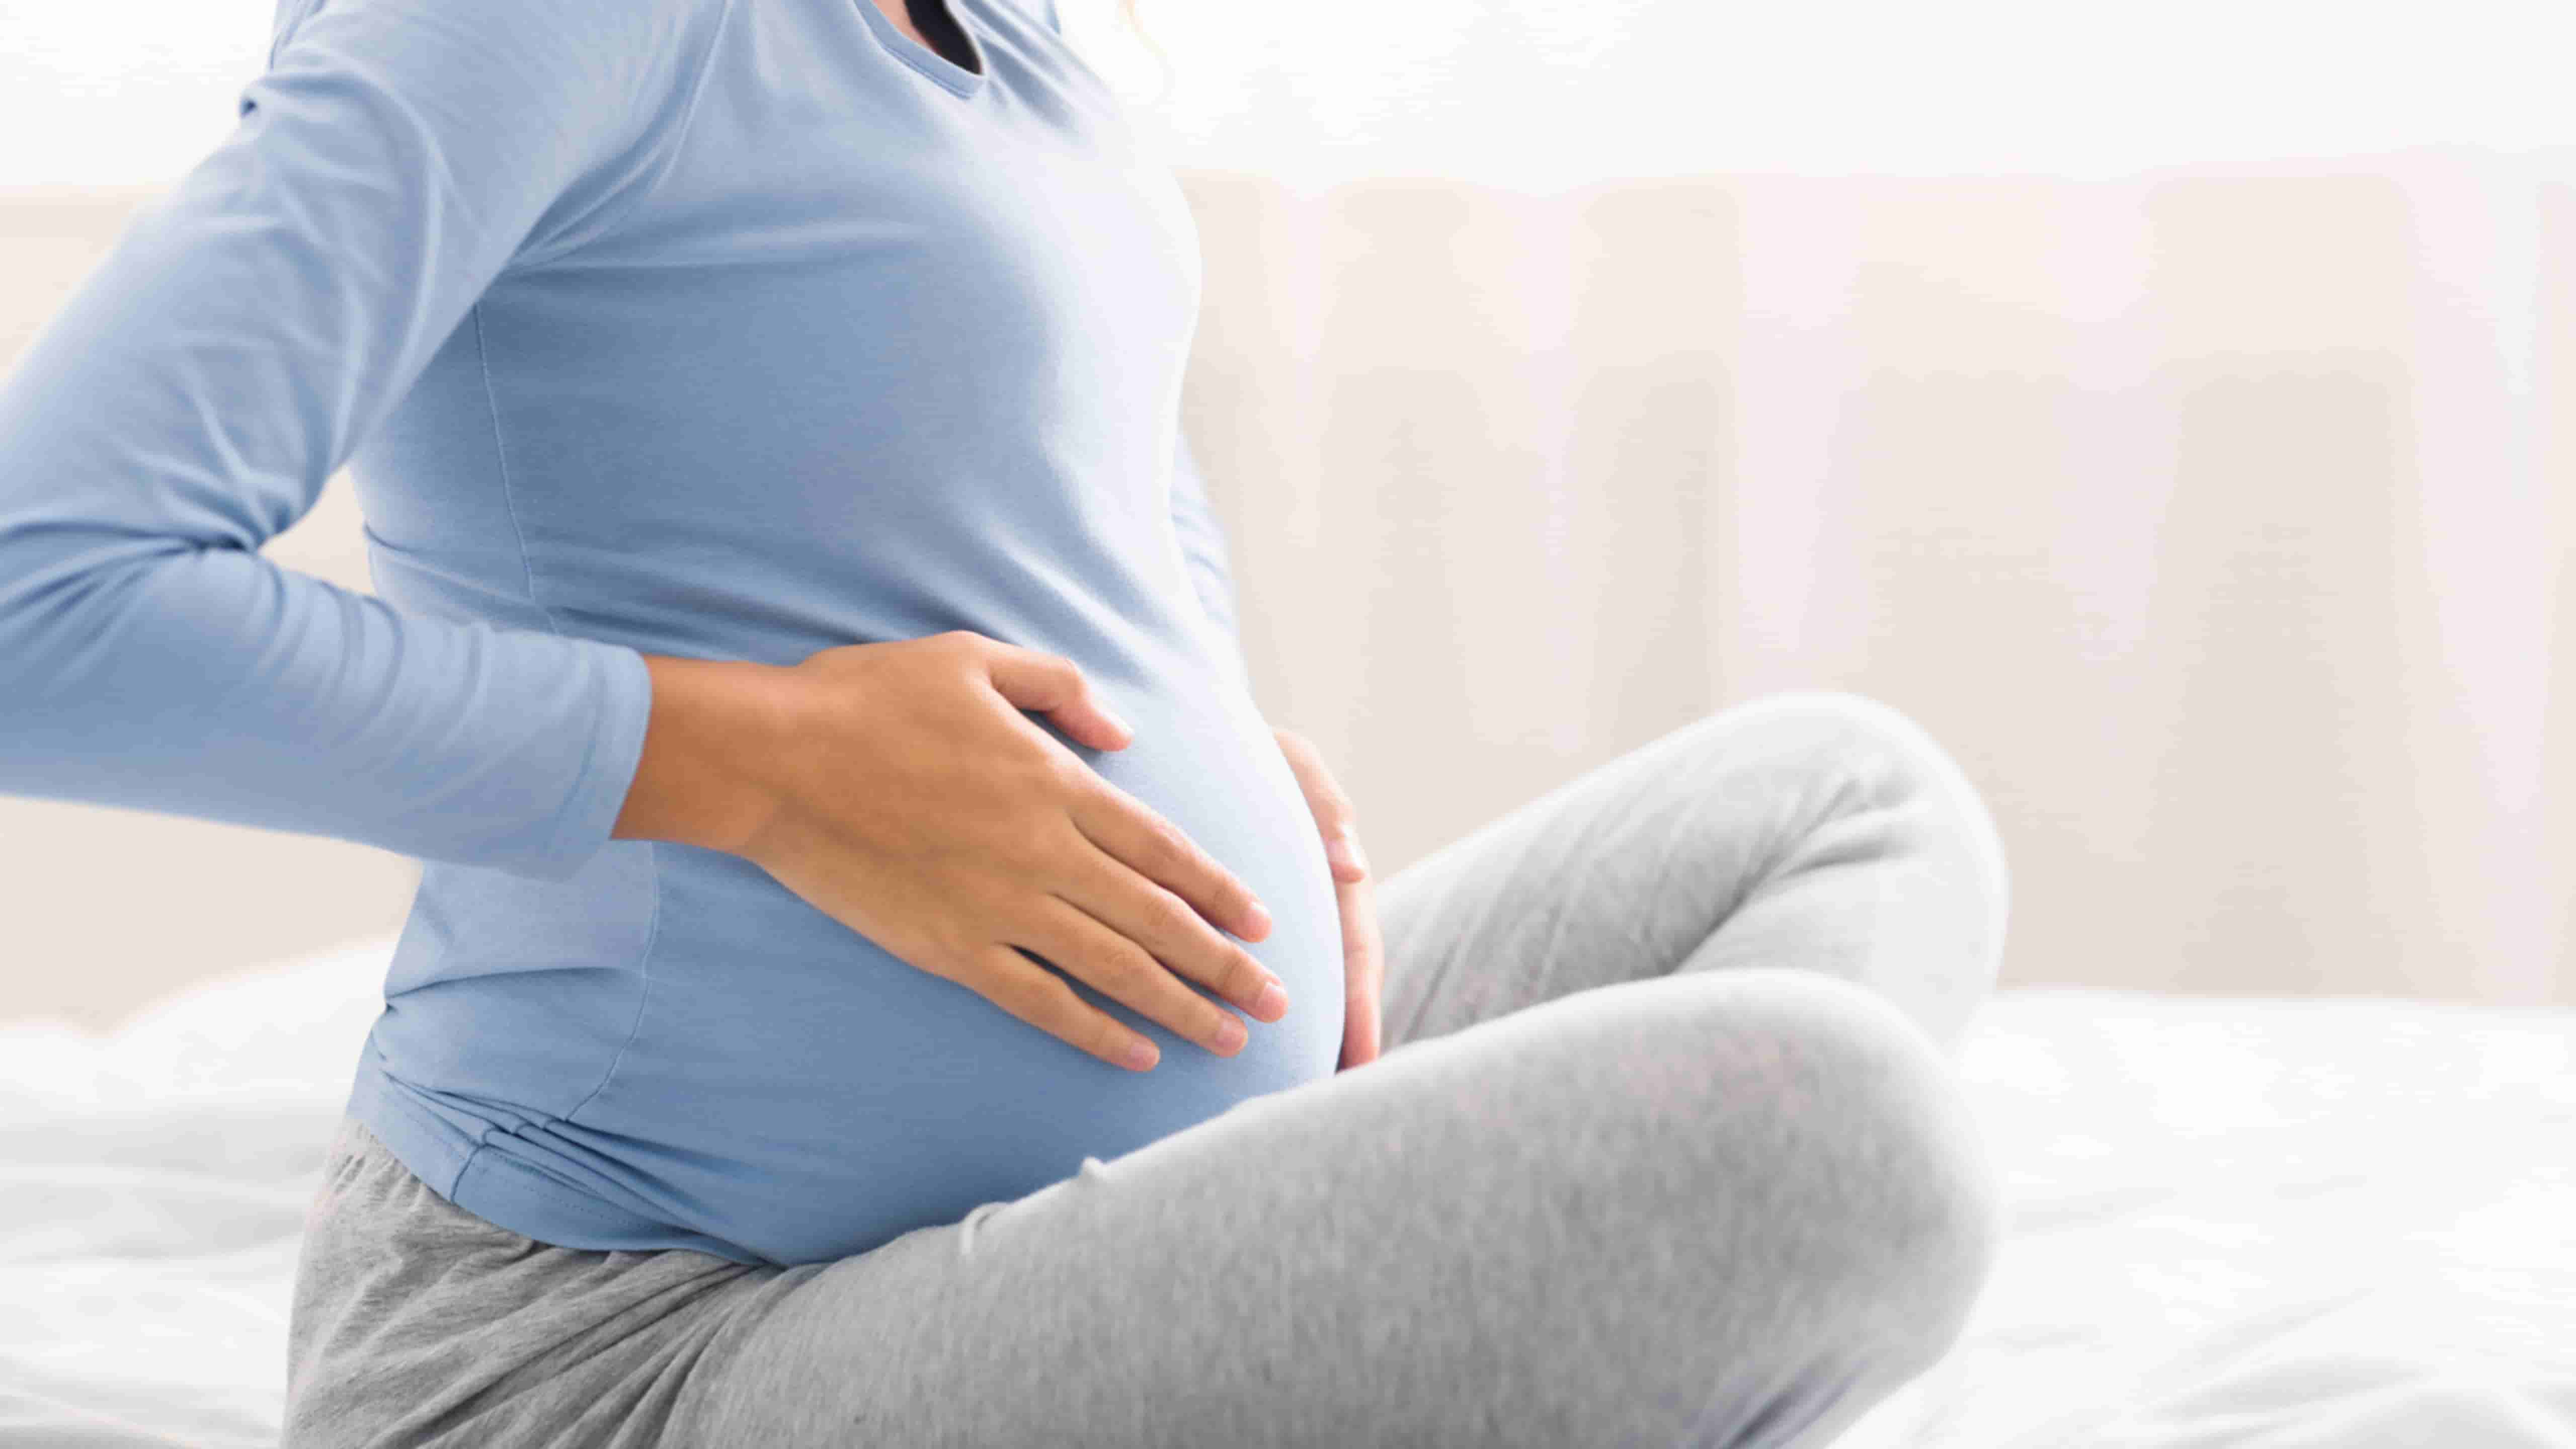 What Is the Unexpected Connection Between Post-Menstrual Cramps and Early Pregnancy?